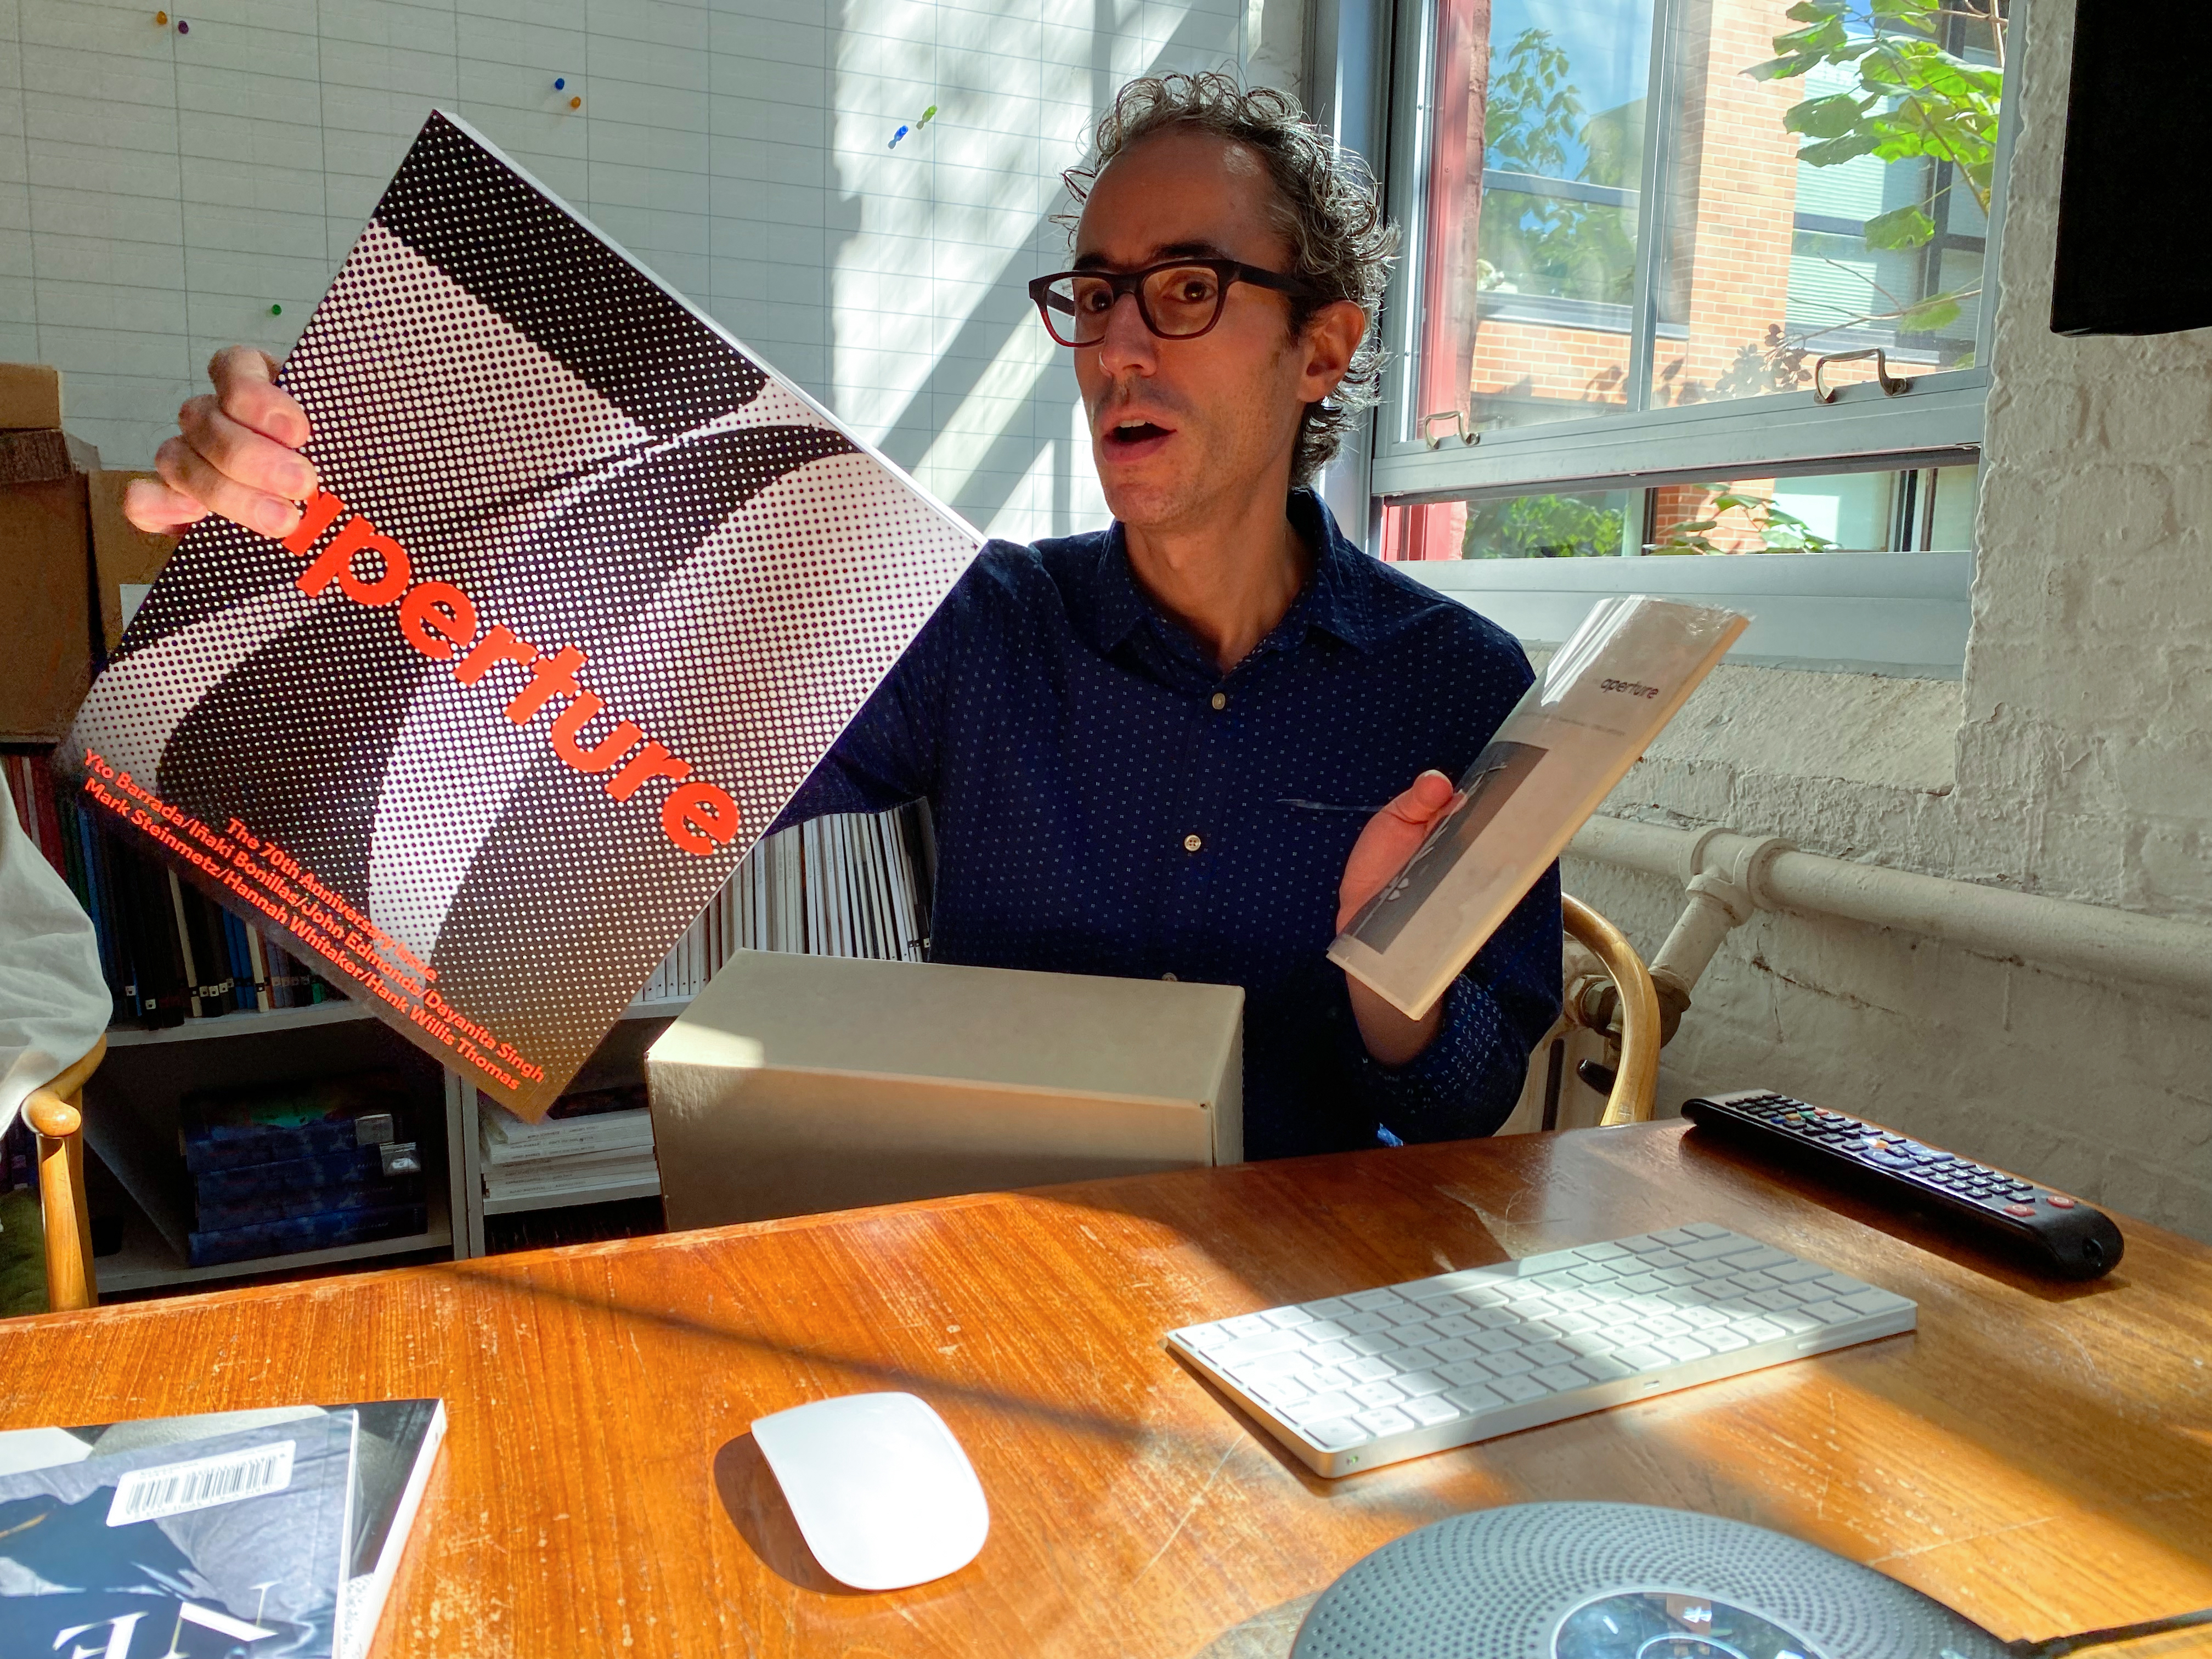 Brendan Embser,  Senior Managing Editor of Aperture, holds up multiple books while at a desk.